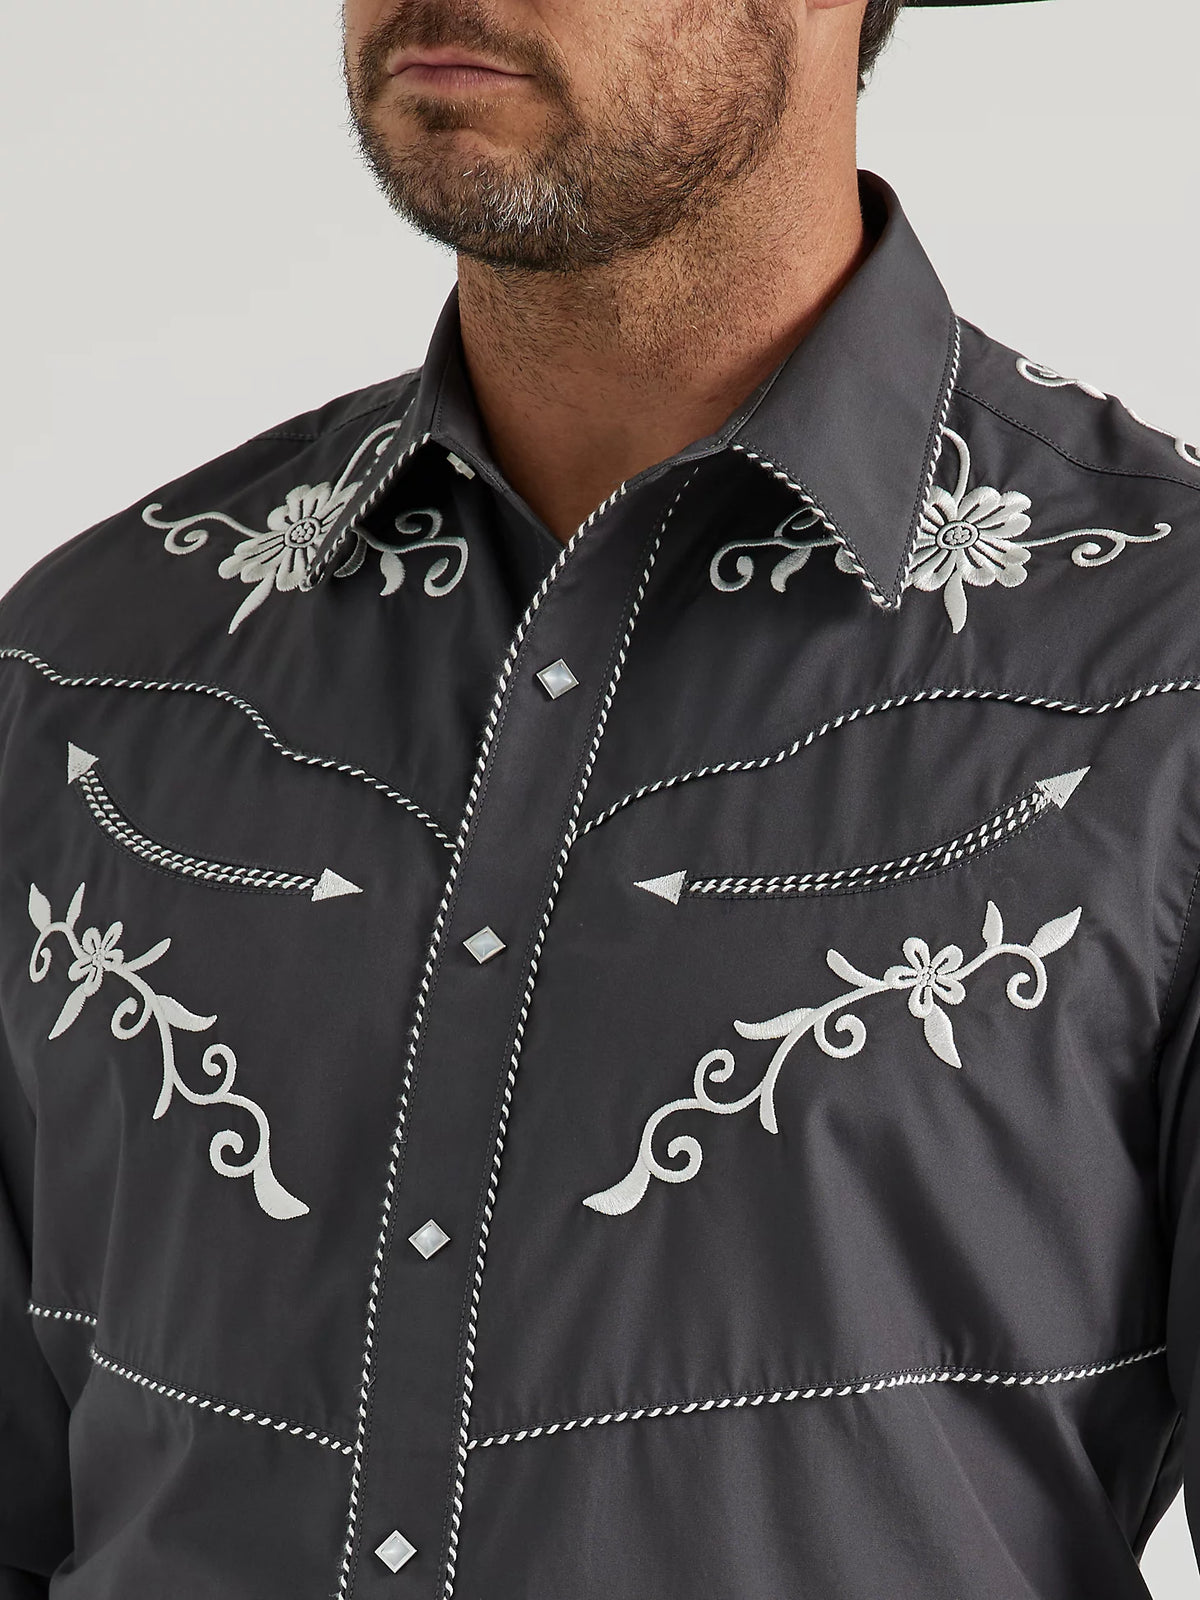 Wrangler Men's Rodeo Ben Long Sleeve Western Snap Shirt in Embroidered Grey